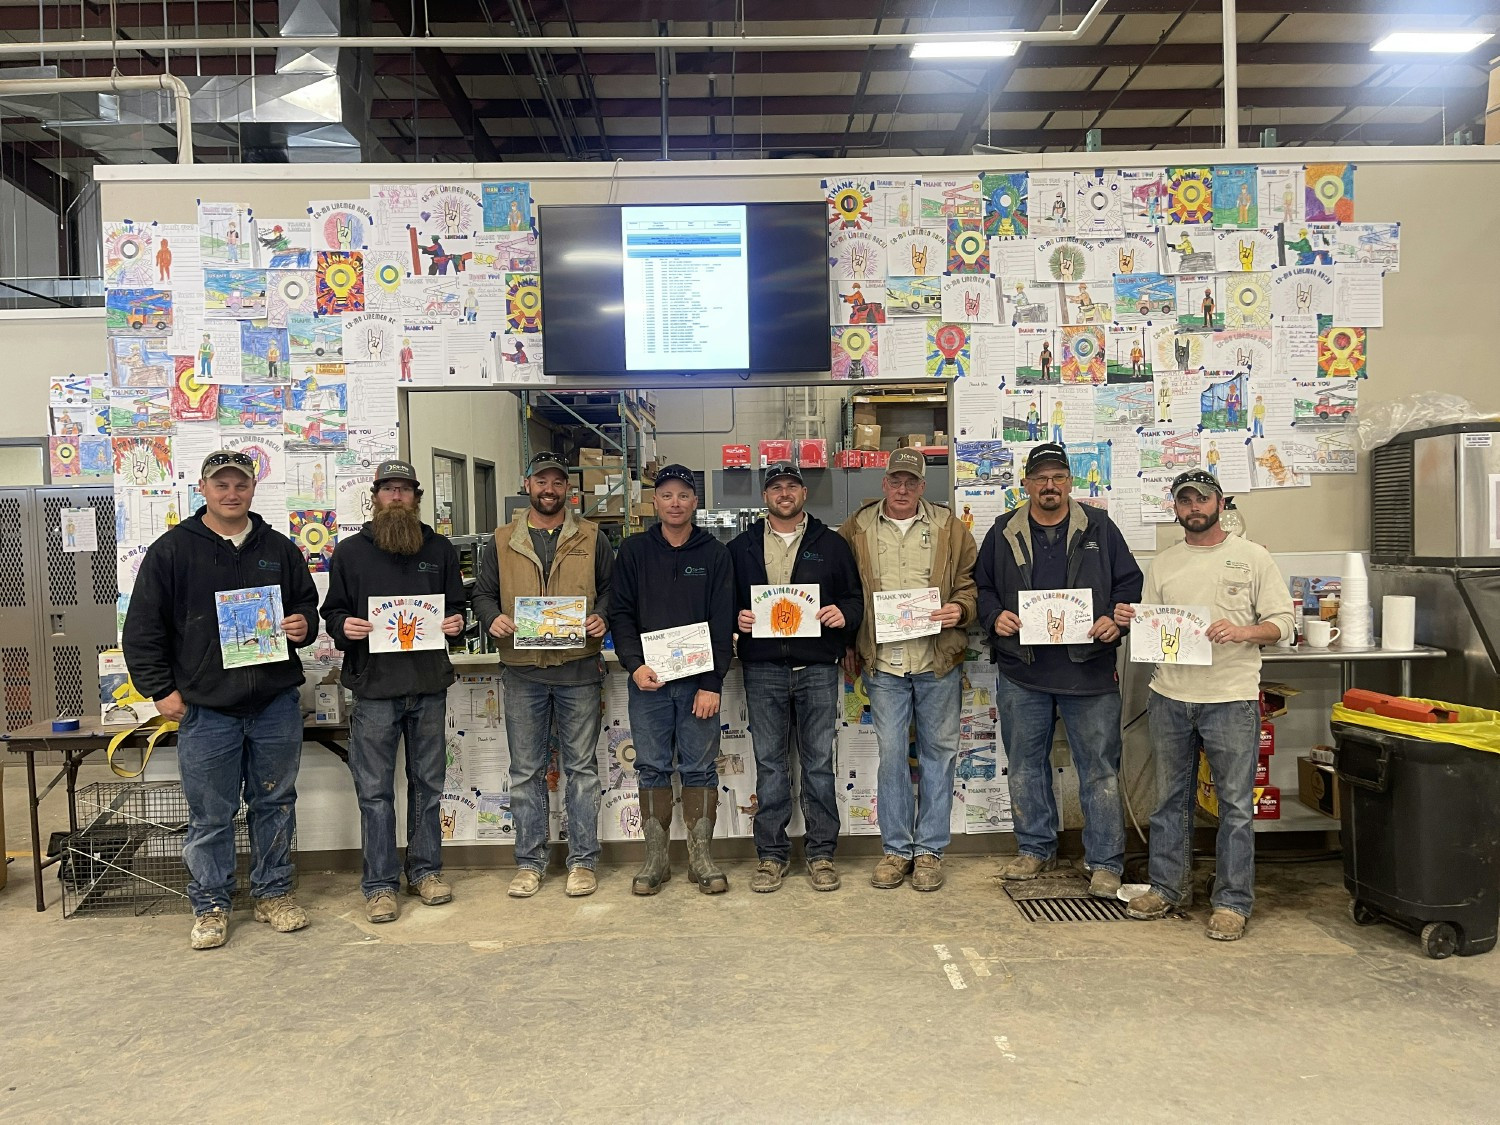 Co-Mo Connect linemen hold coloring pages local area schools sent in for Linemen Appreciation Day. 